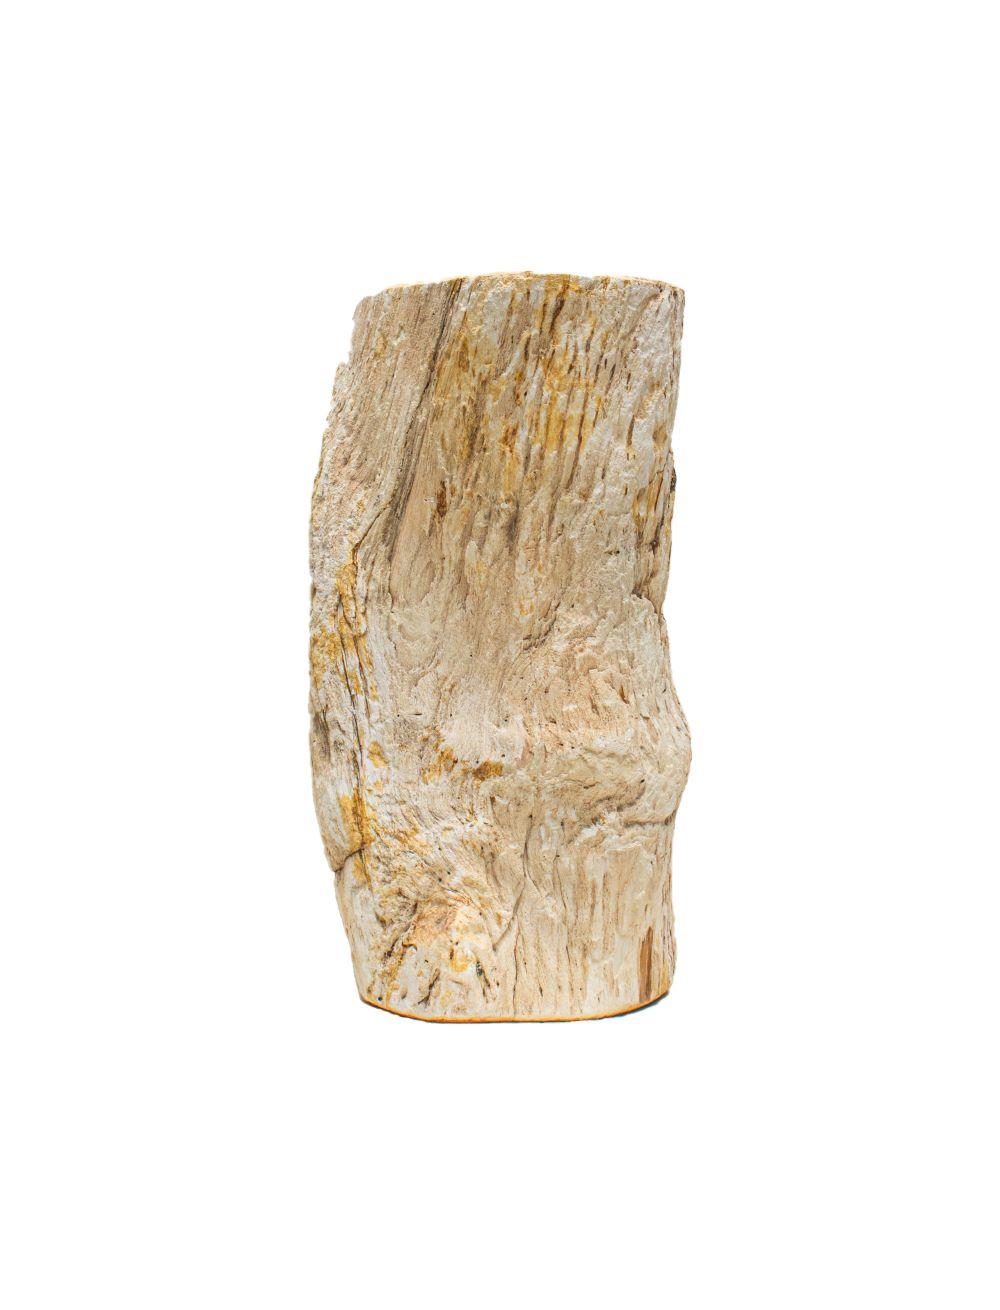 Petrified wood side table adorned with crystal quartz.

Petrified wood is a special type of fossilized wood. This type of mineralized petrified wood went through an intricate process that took place over millions of years. Petrifaction is the